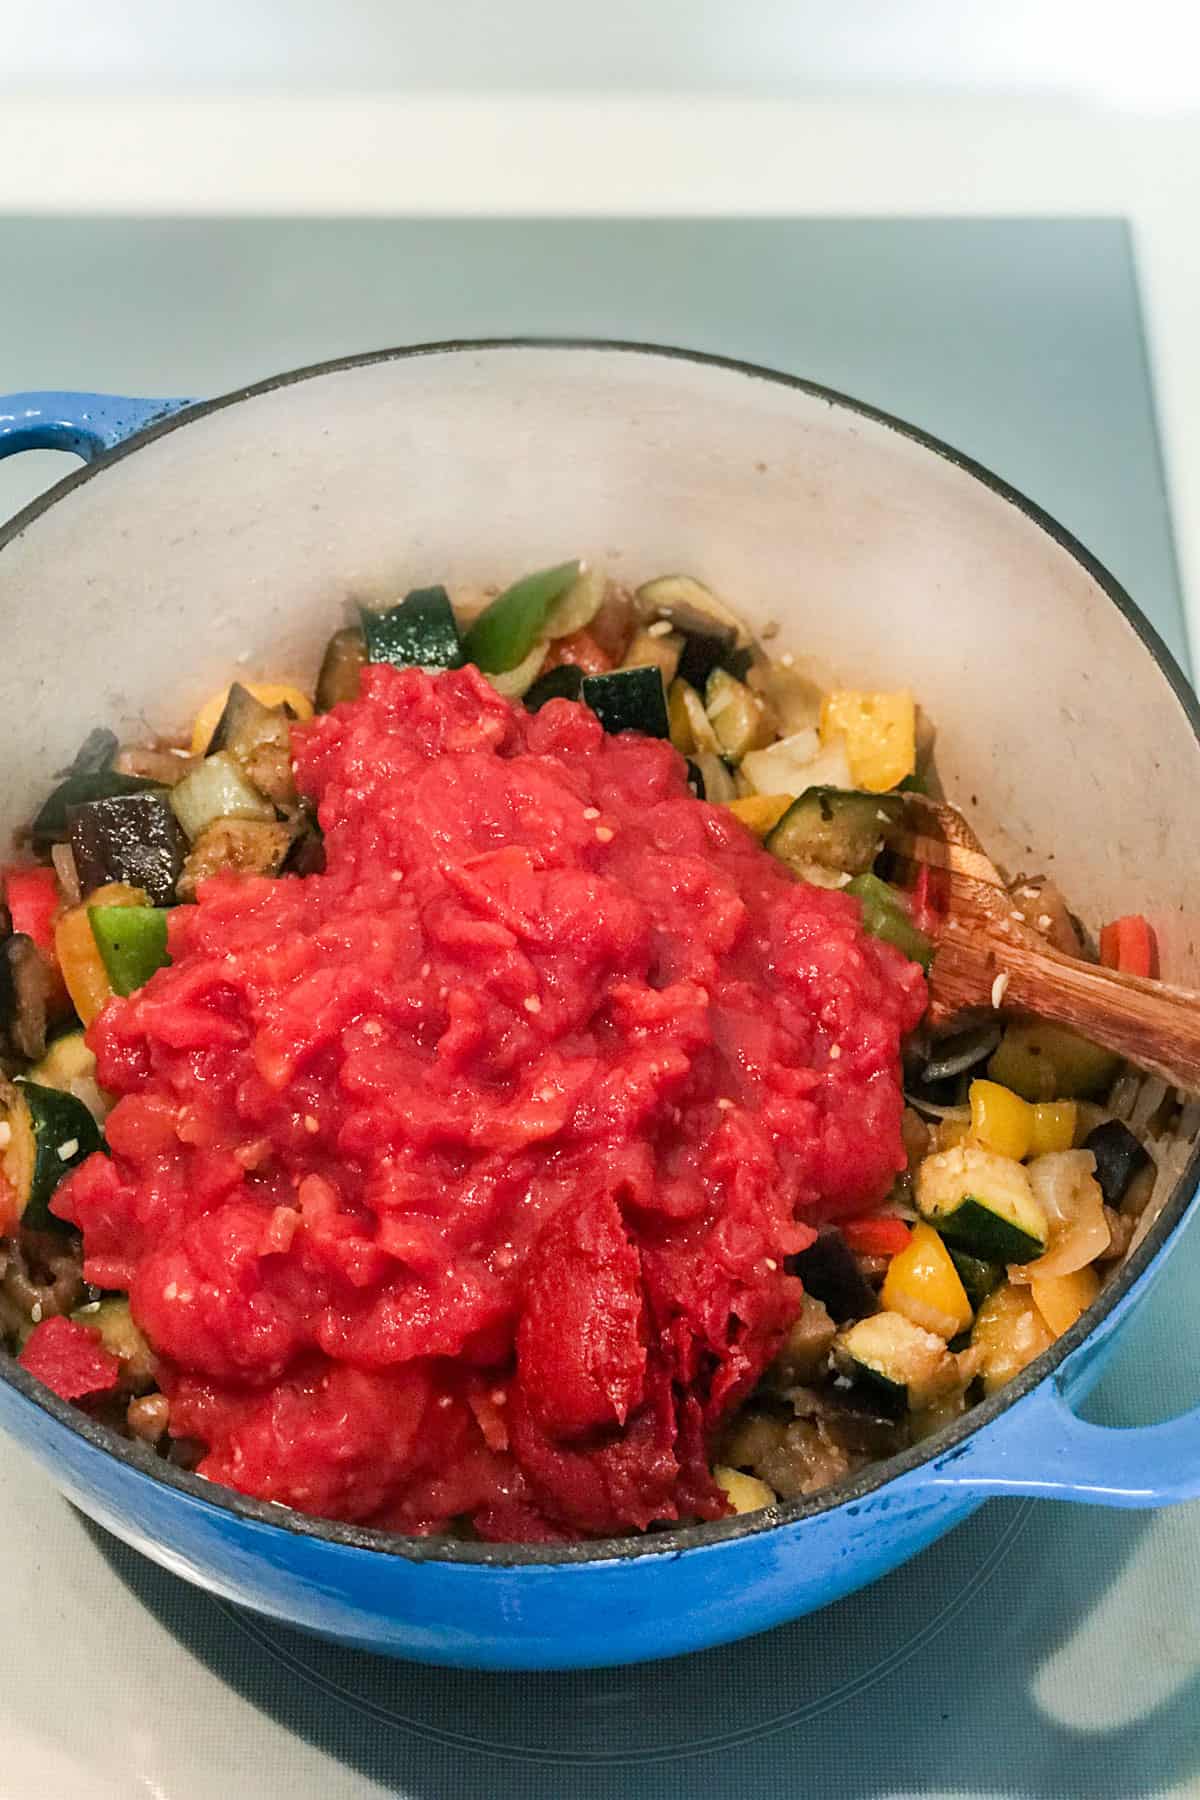 Crushed tomatoes and tomato pasted added to Ratatouille vegetables in a dutch oven